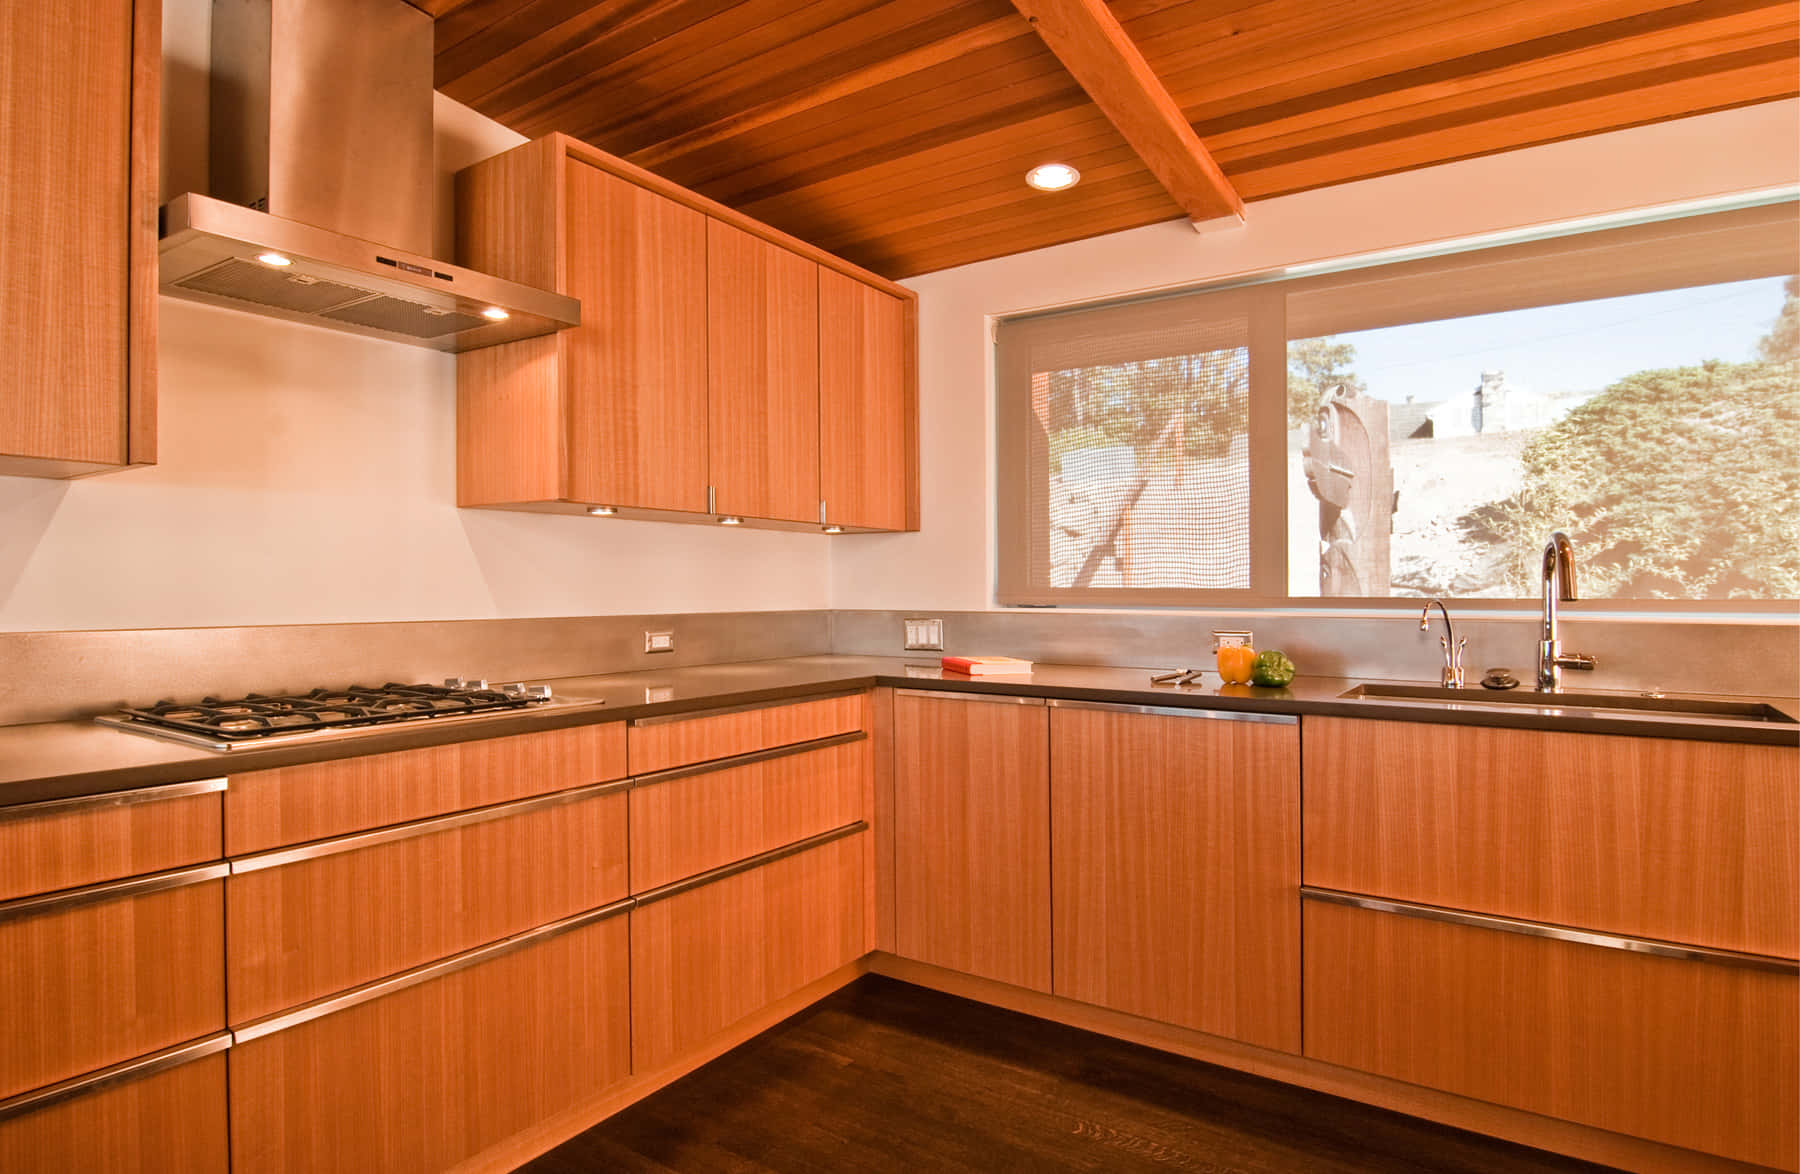 A Kitchen With Wooden Cabinets